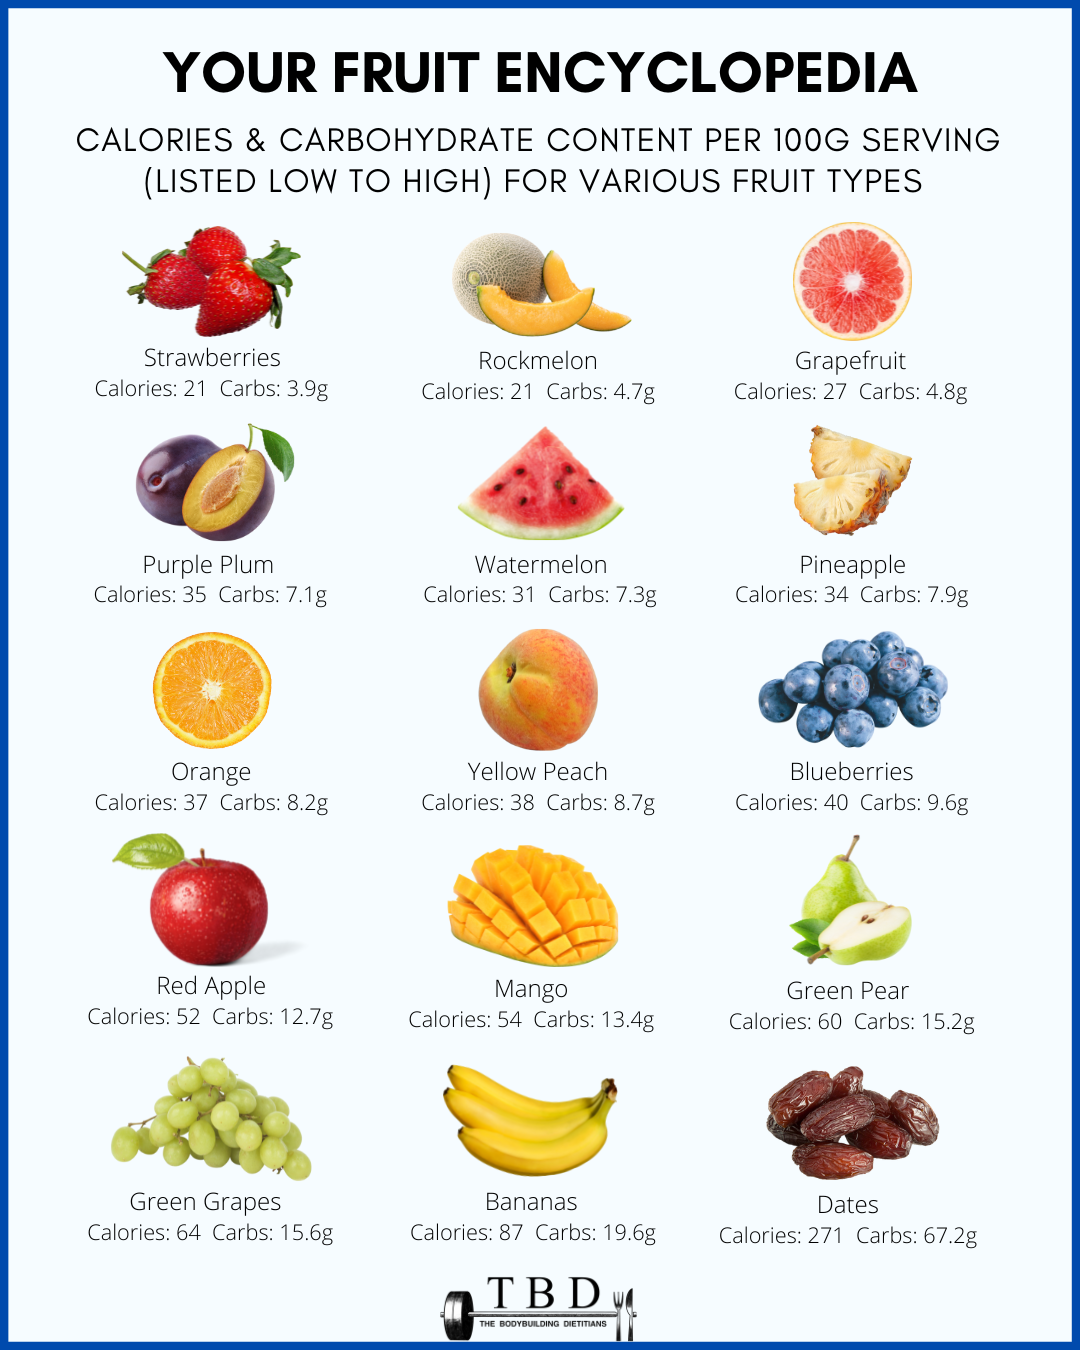 Low-Carb and High-Carb Fruits Ranked Per 100g Serving — The